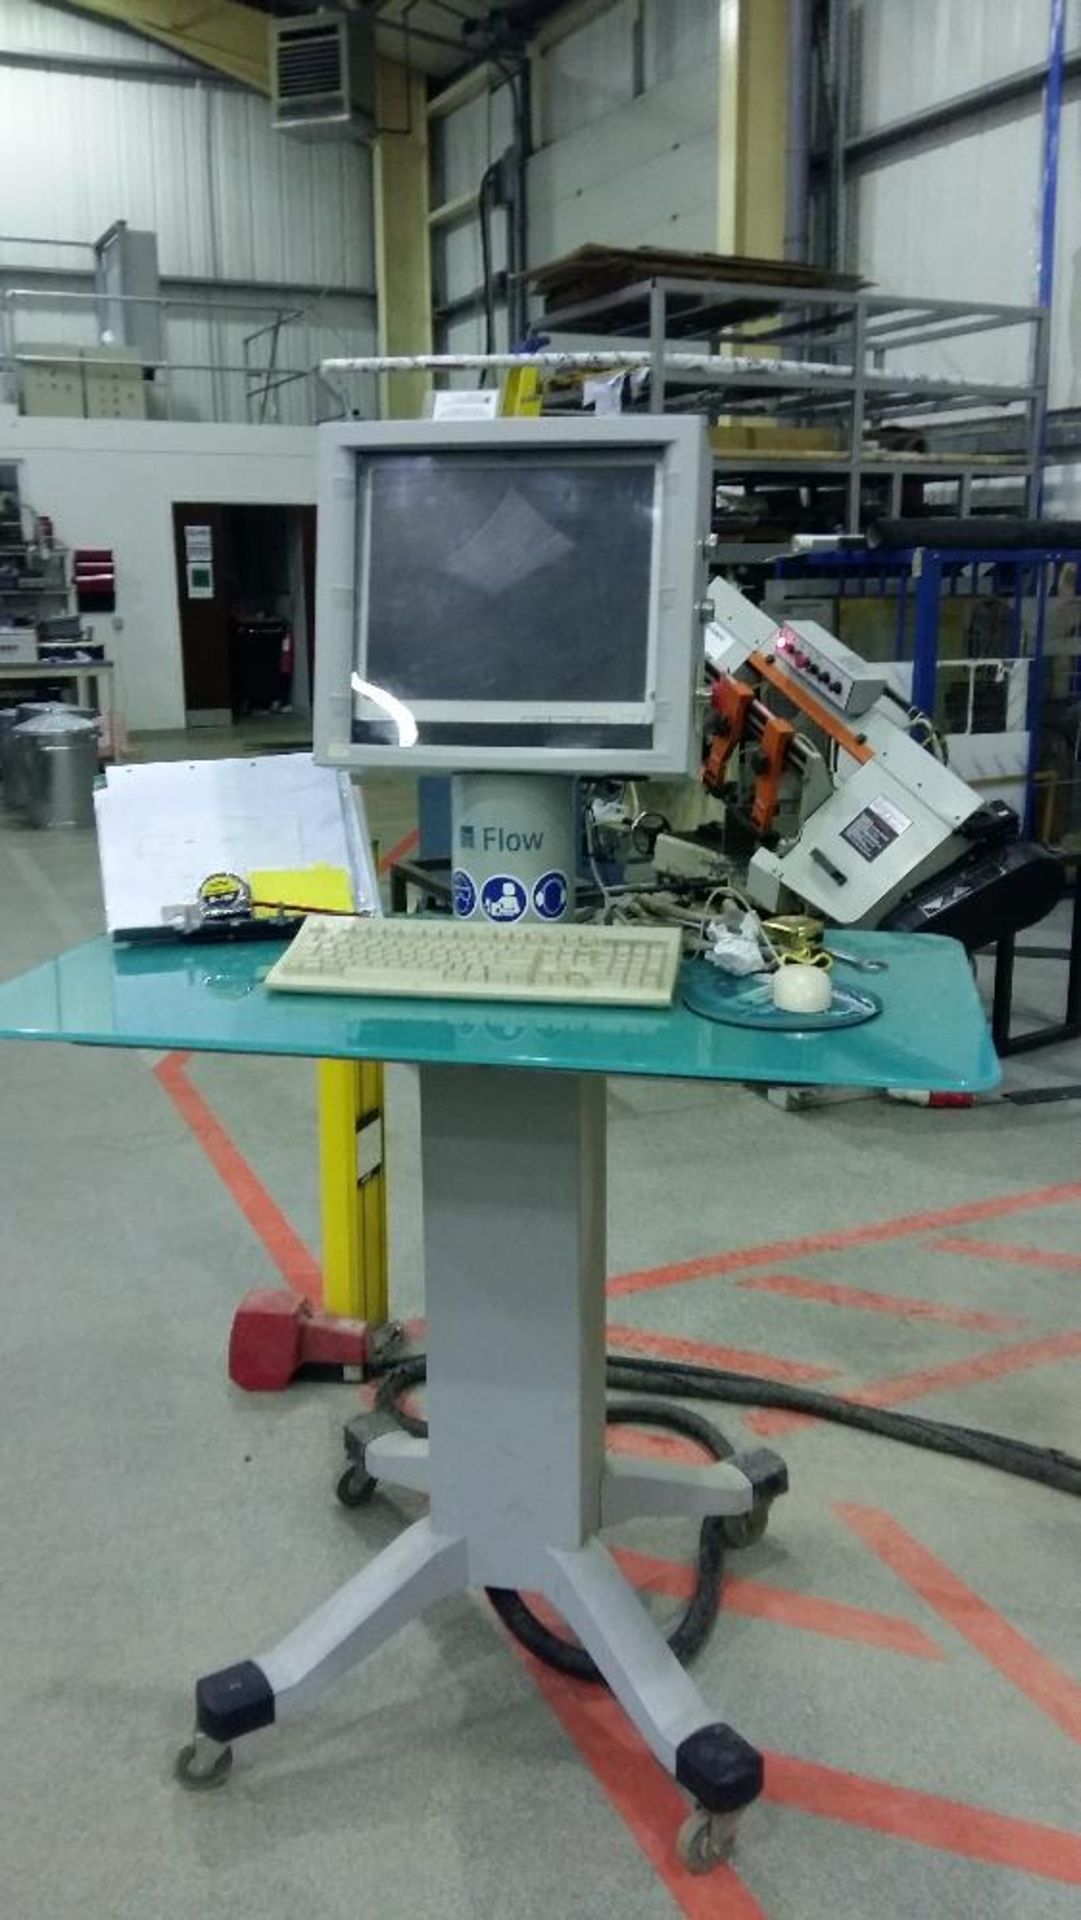 Flow Mach 3 2513b model 044430-1 CNC water jet cutting table - Image 15 of 28